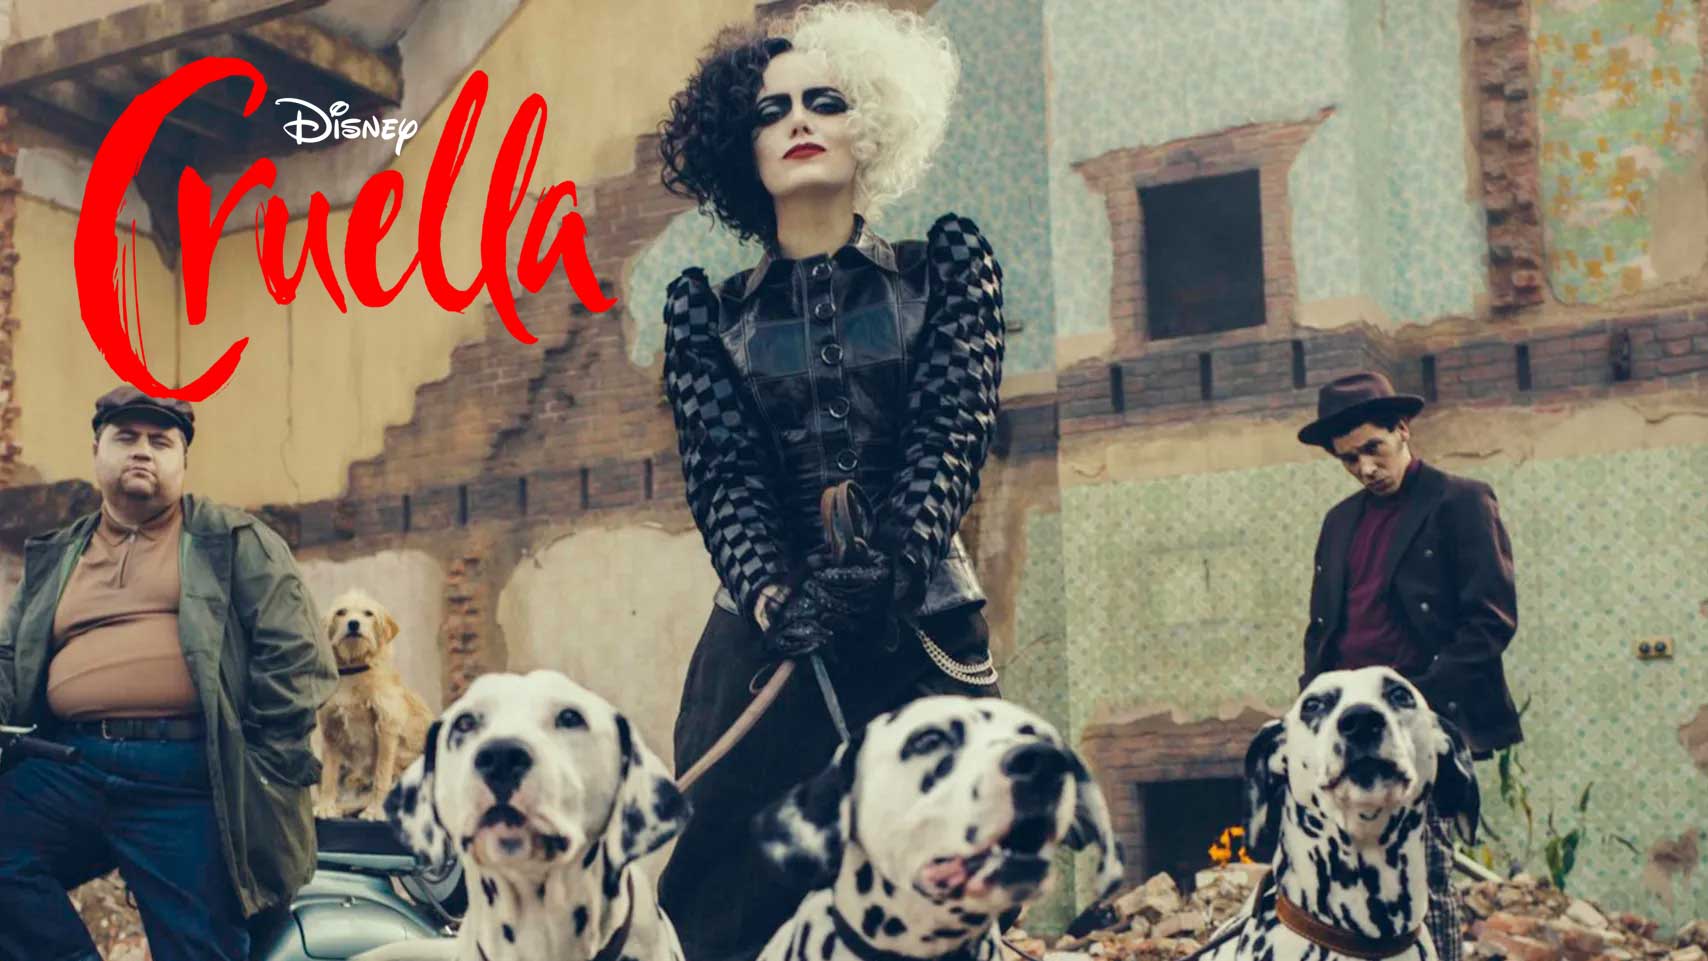 Emma Stone is Born to Be Bad in The First Cruella Trailer